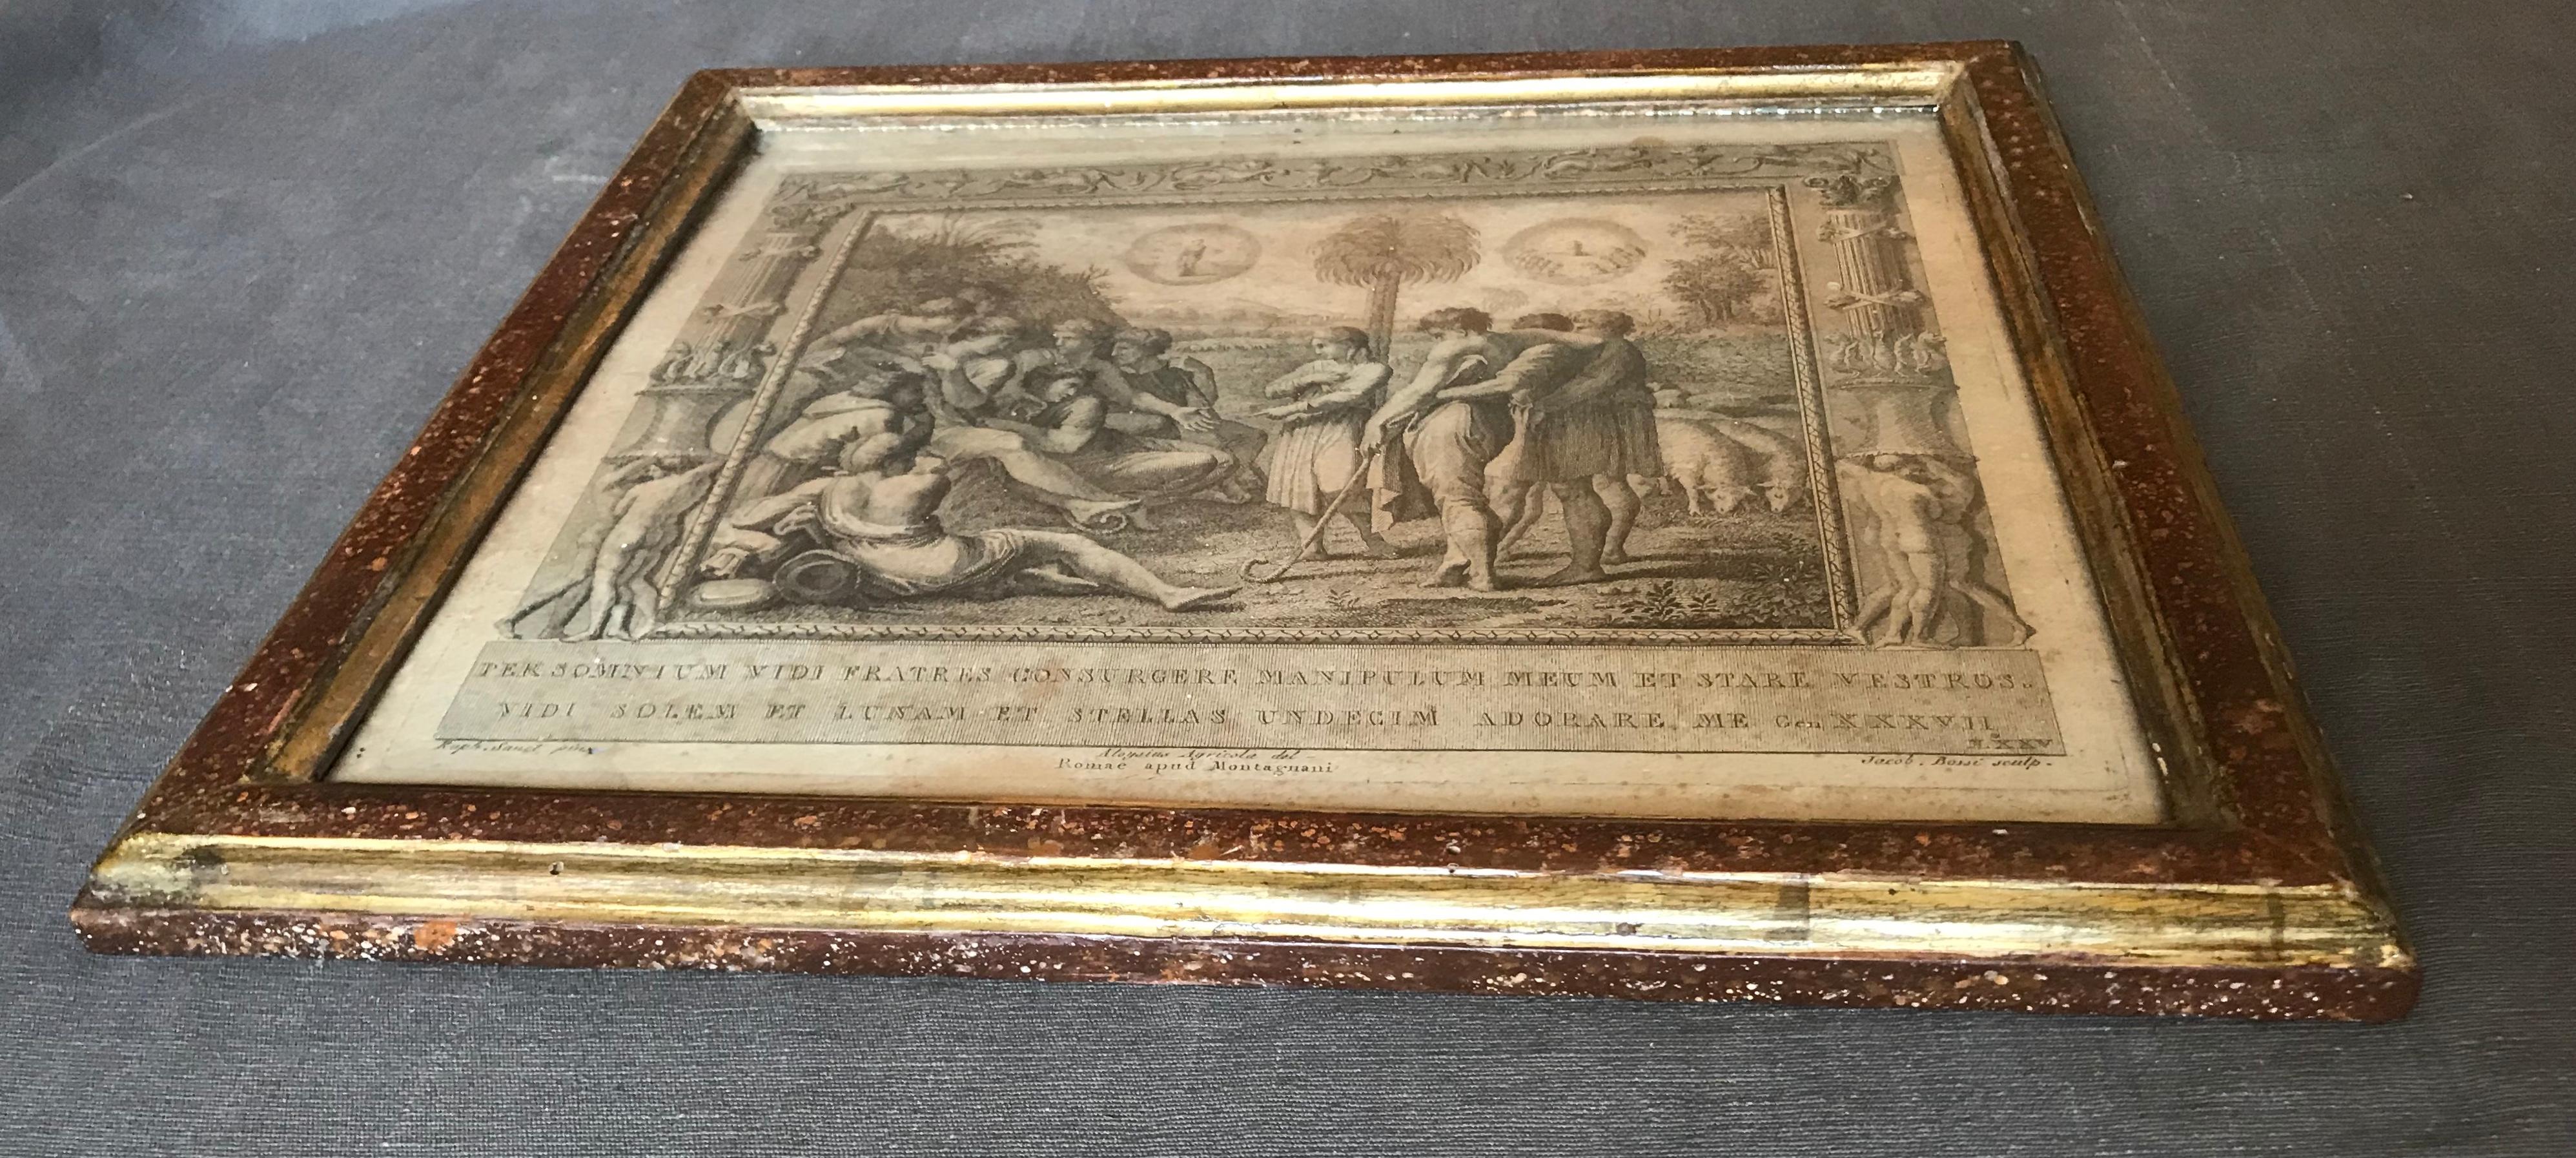 Pair of engravings in 18th century faux porphyry and gilt frames. Richly rendered faux porphyry frames with gilt borders and inner edges and further porphyry to all sides enclosing 17th century engravings of Noah and his family issuing from the Ark